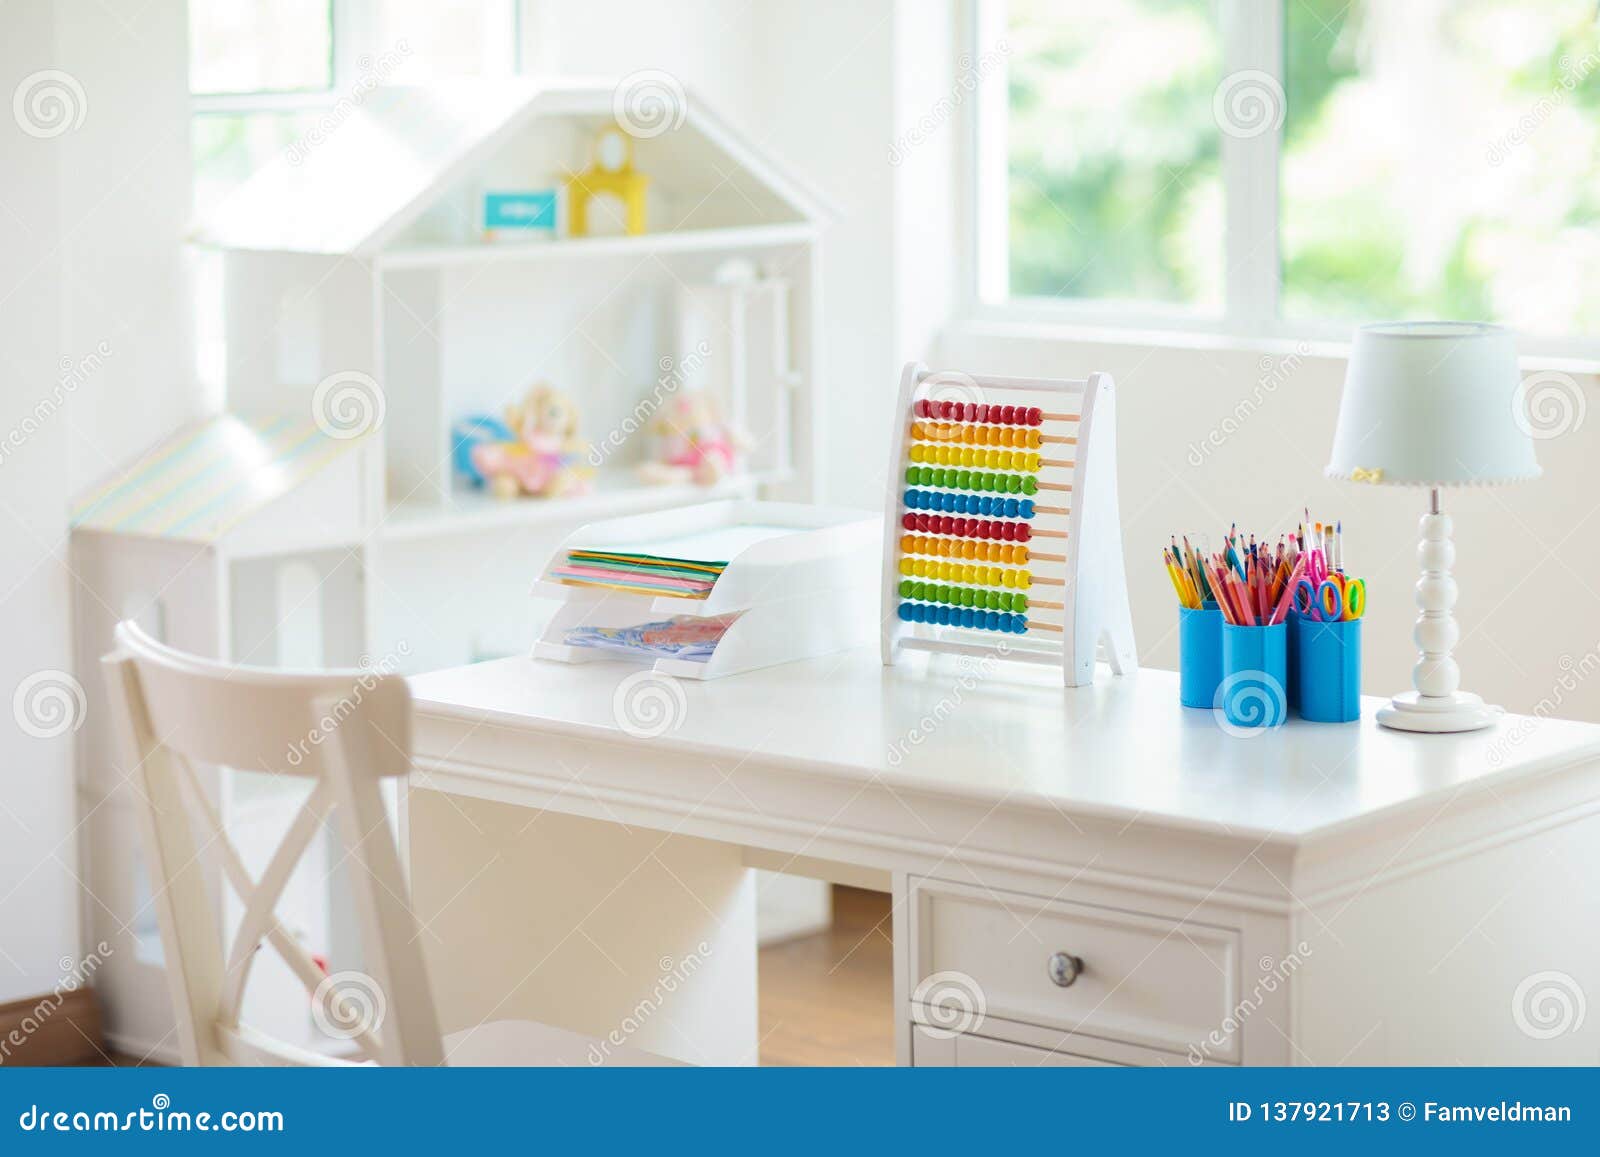 Kids Bedroom With Wooden Desk And Doll House Stock Image Image